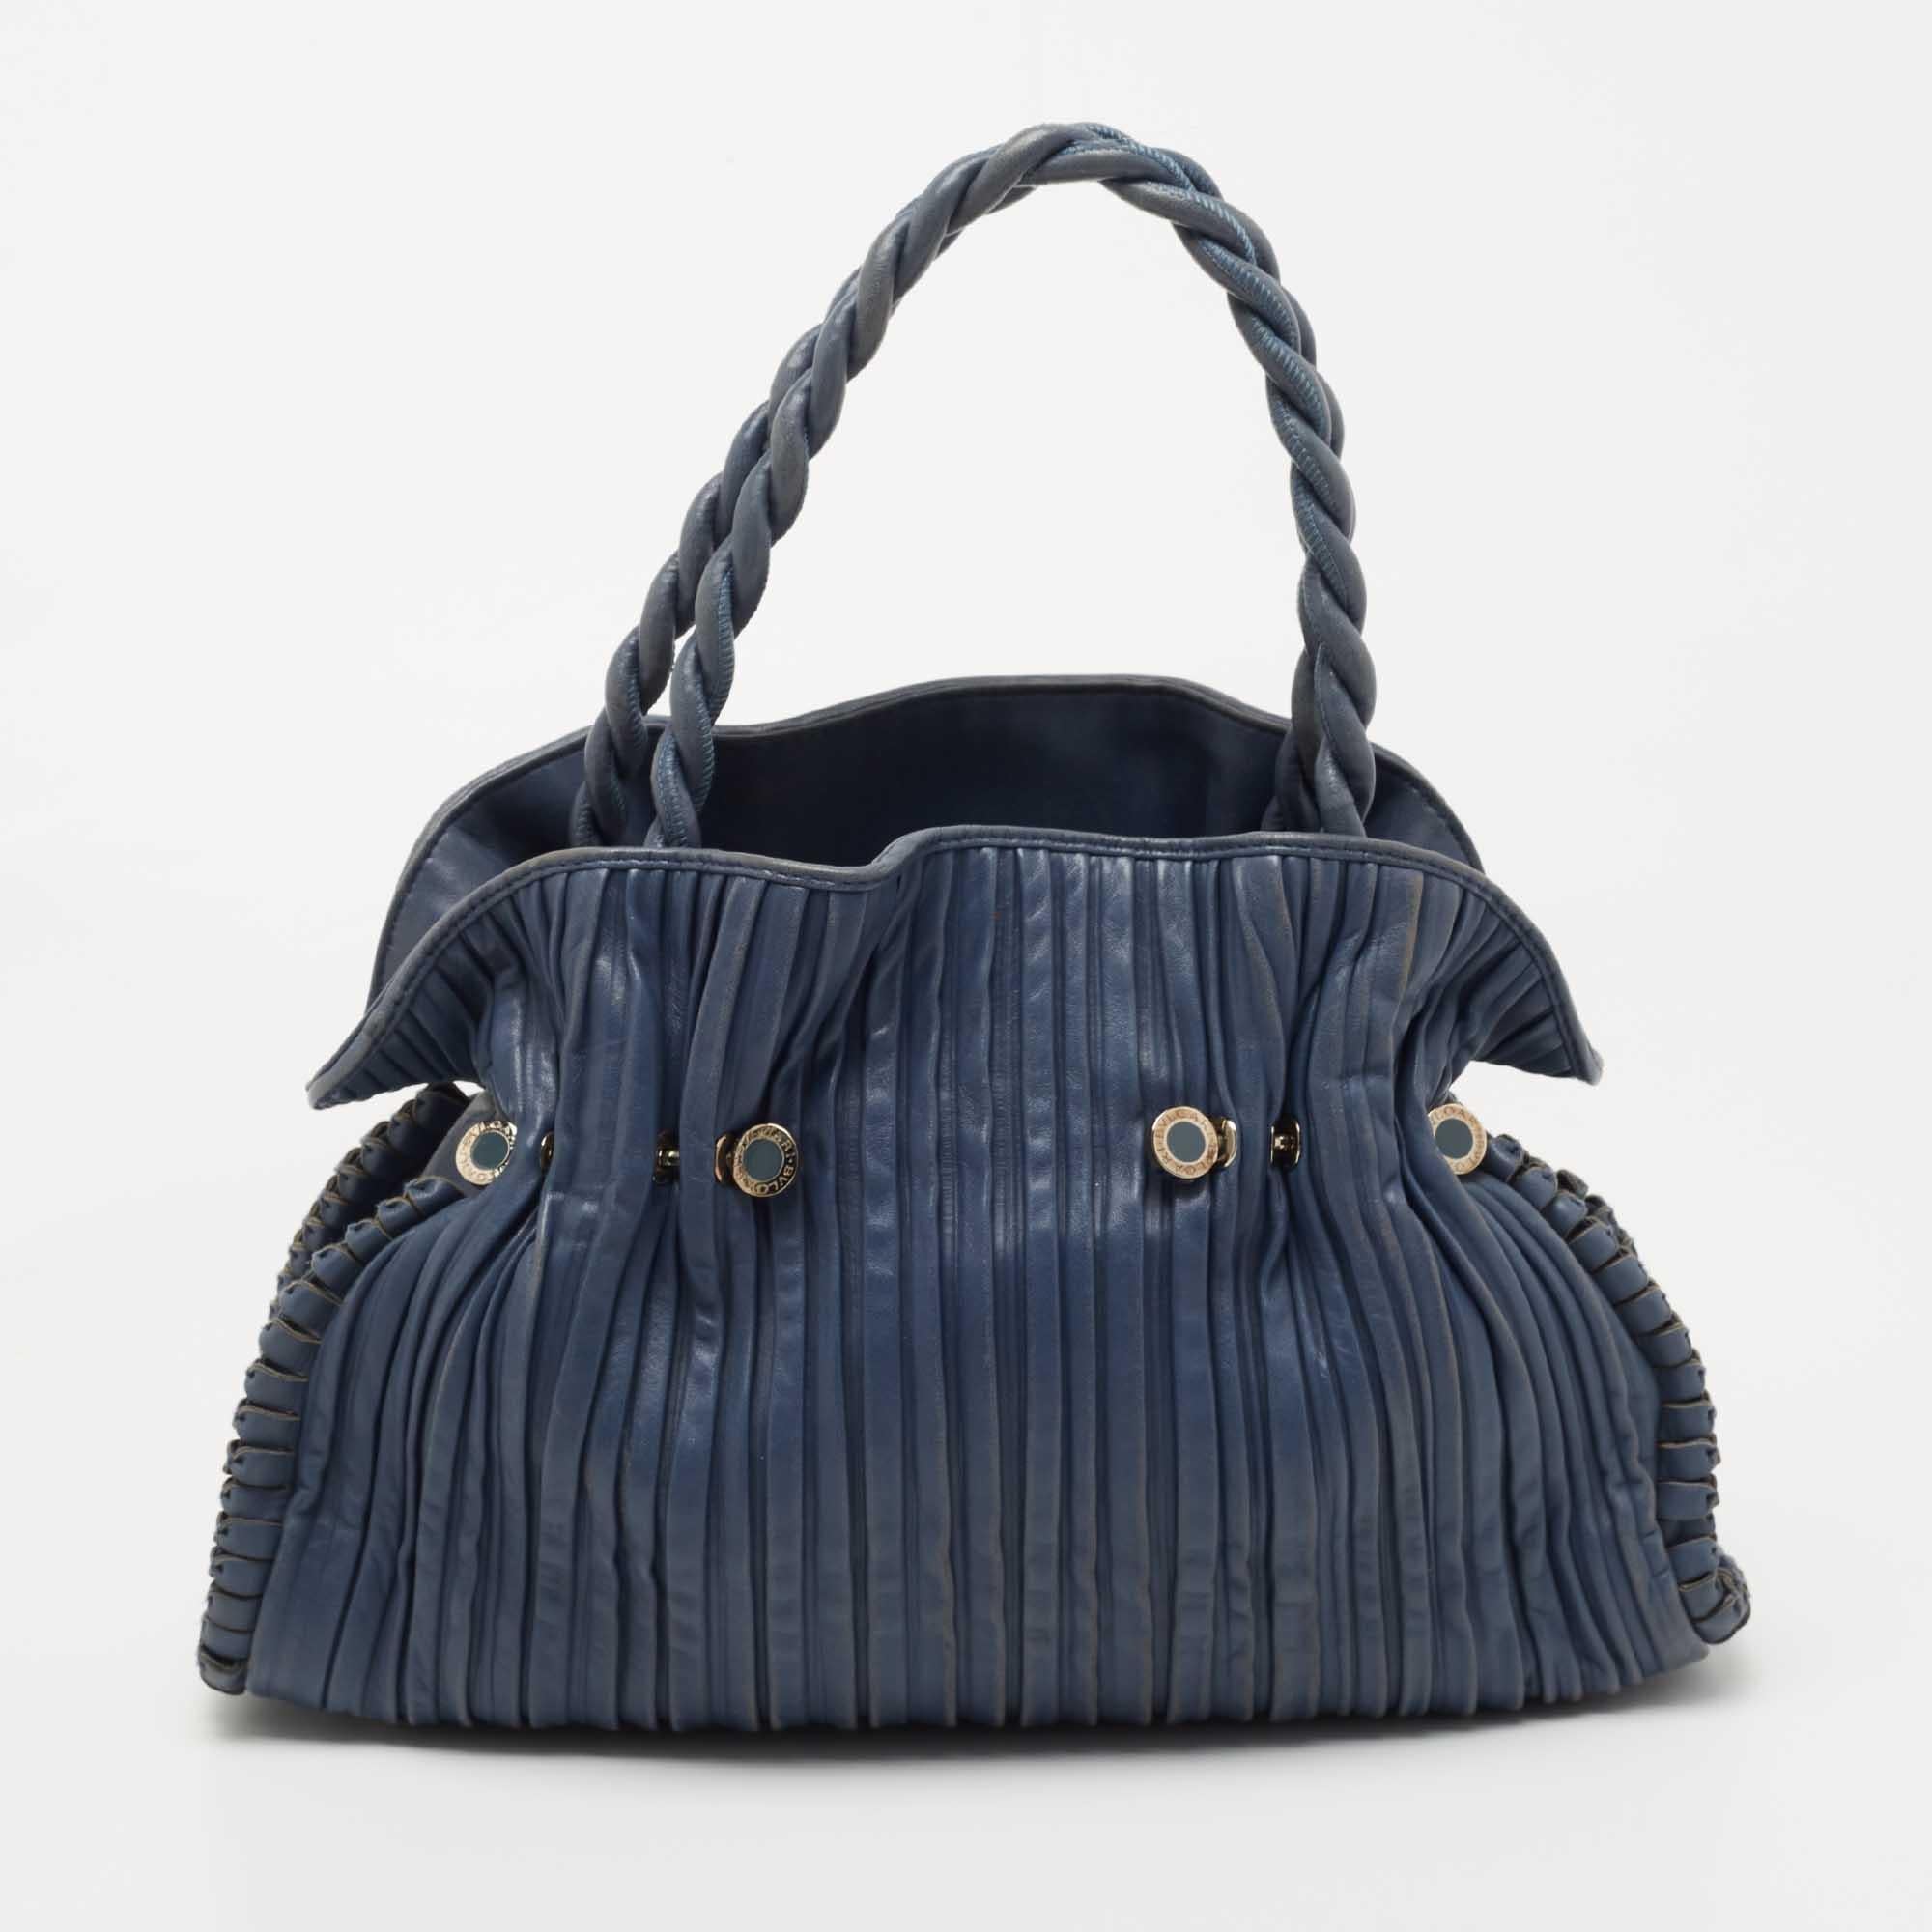 Special days call for special bags, and Bvlgari has just one for you. This gorgeous satchel comes in navy blue and fits more than enough. It is constructed very carefully using pleated leather and thus has a textured feel. Inside the leather